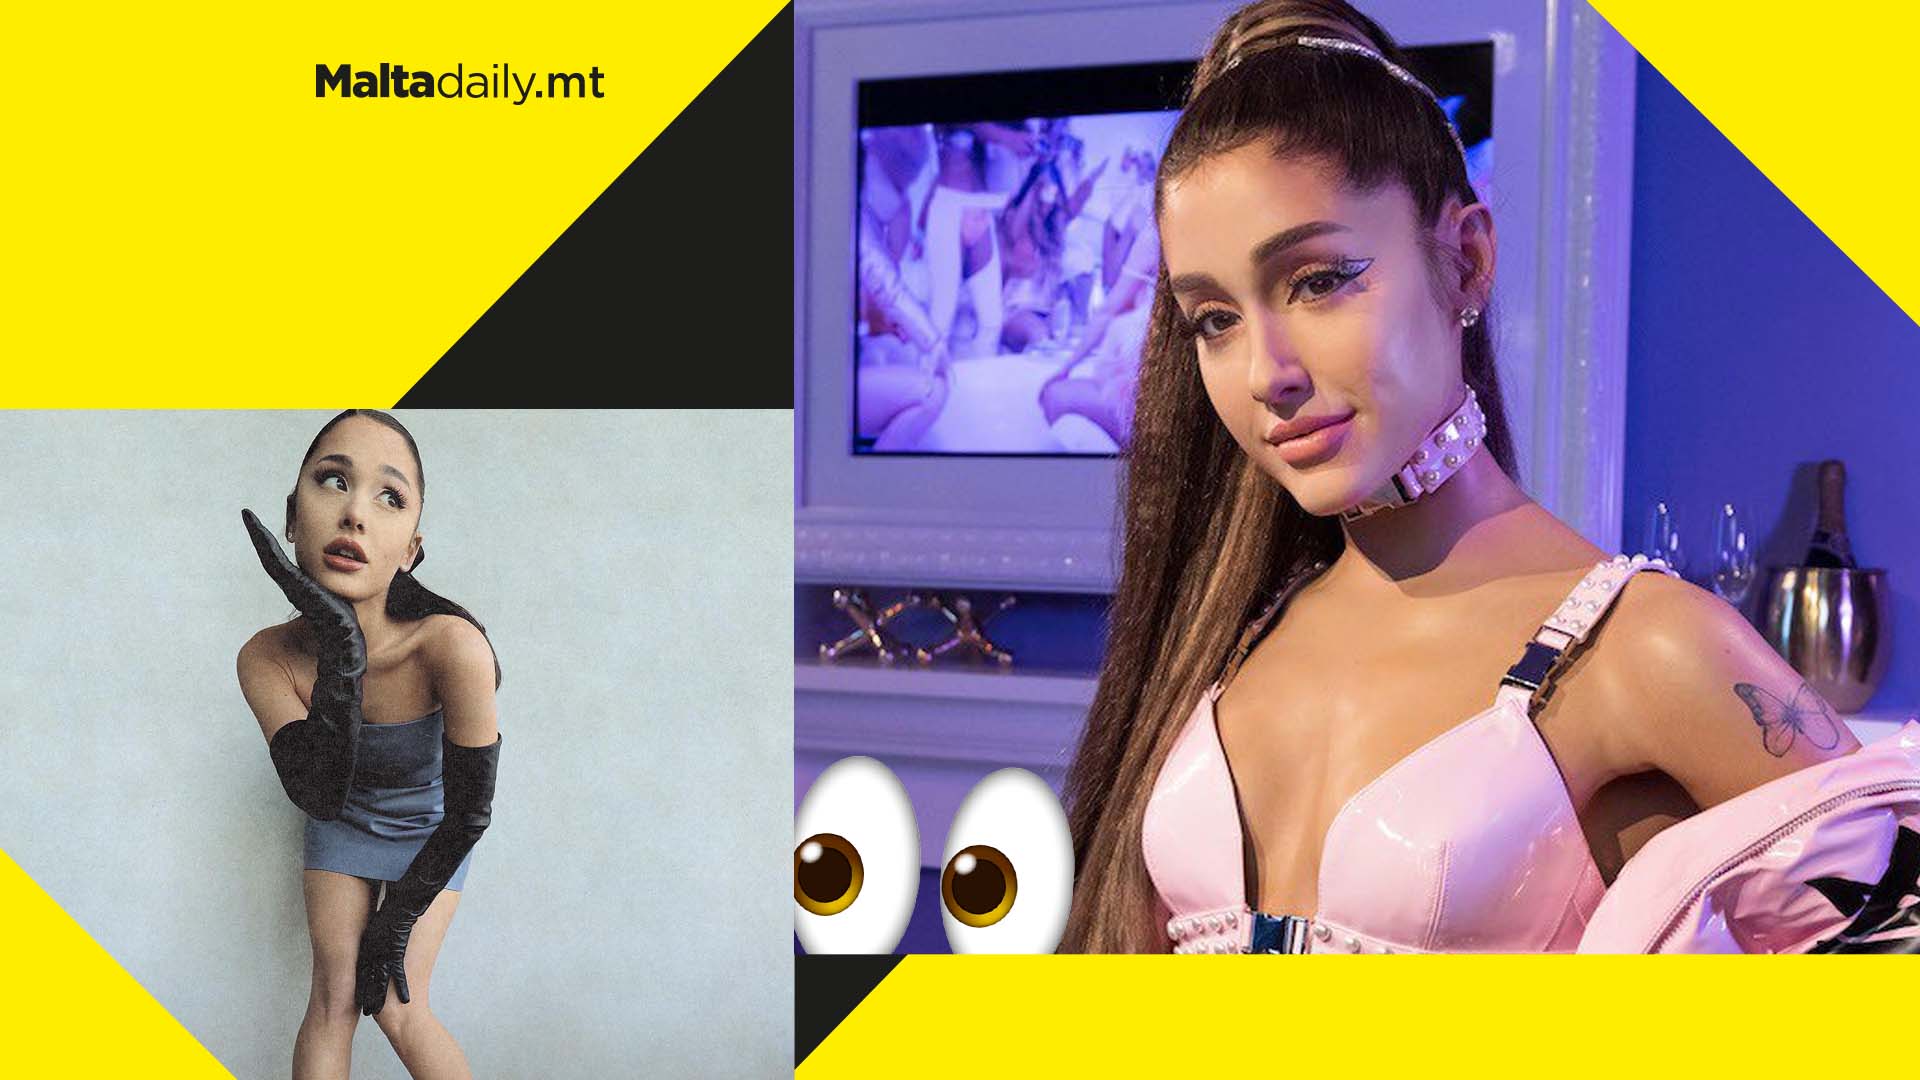 Ariana Grande's new wax figure at Madame Tussauds is getting mixed reactions